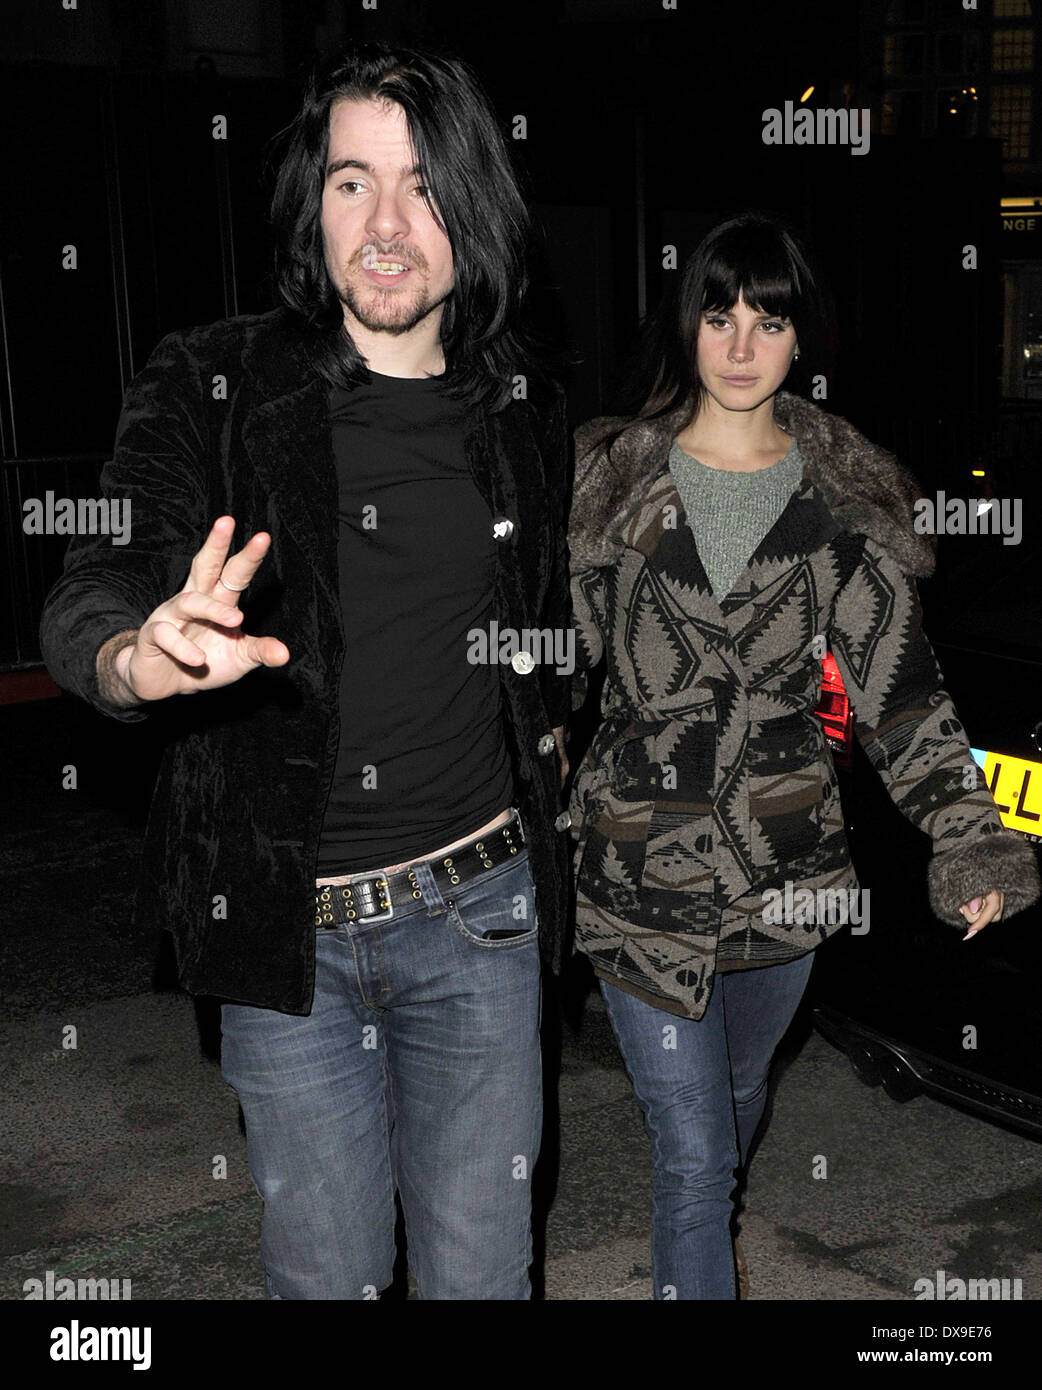 Lana Del Rey and boyfriend Barrie James O'Neil outside their hotel. London, England - 13.11.12 Featuring: Lana Del Rey and boyf Stock Photo